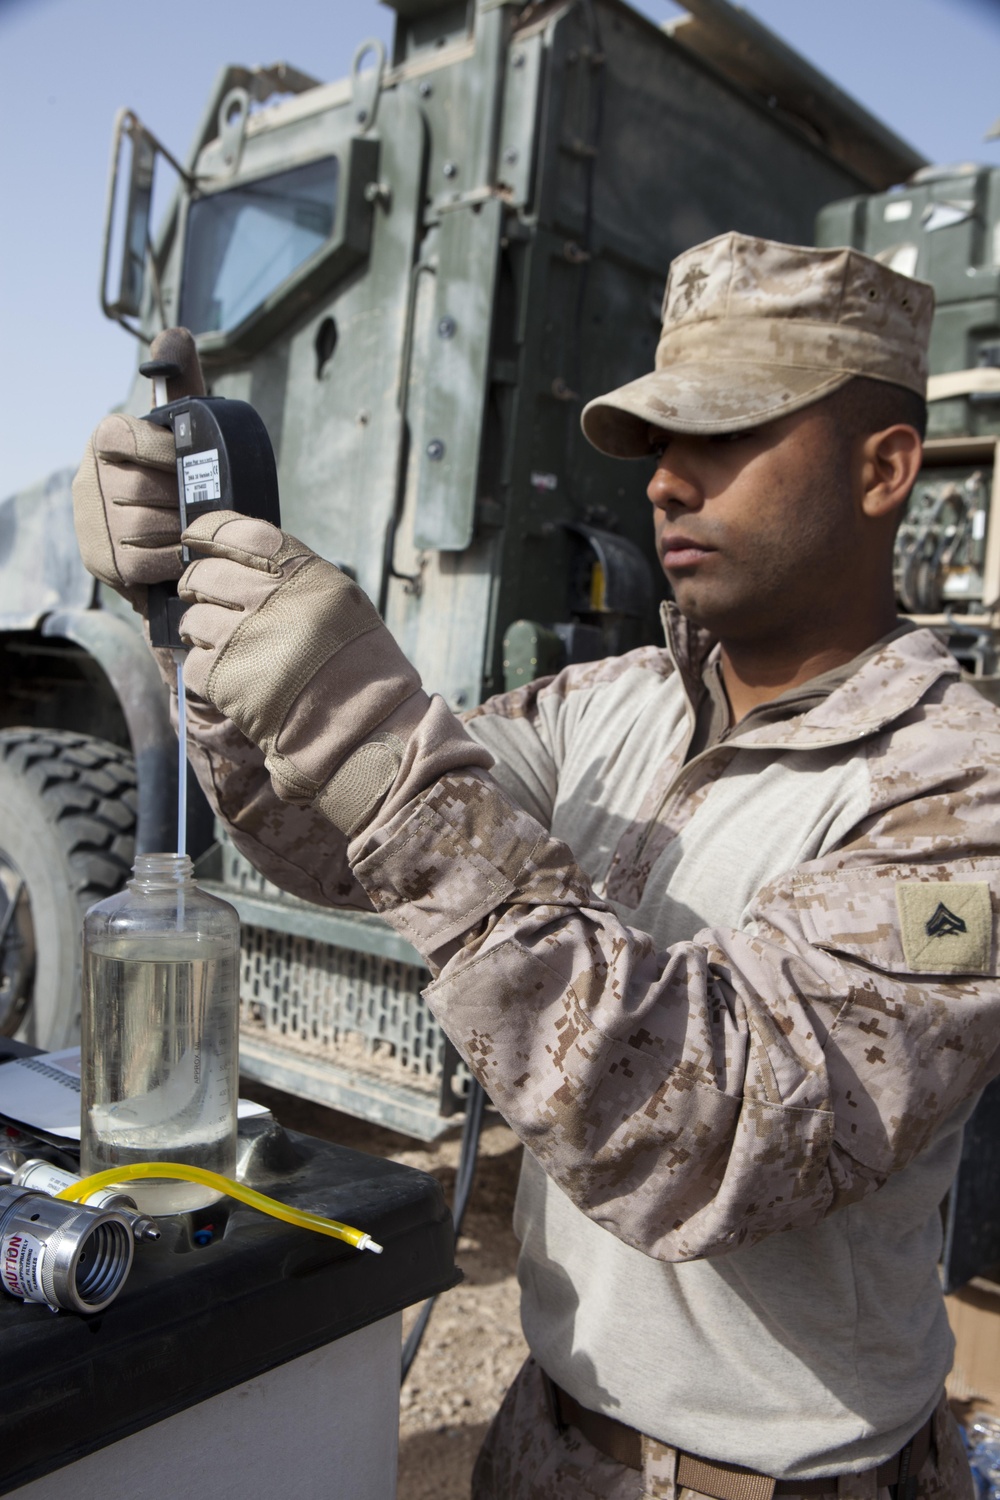 New rearming point expands Marines